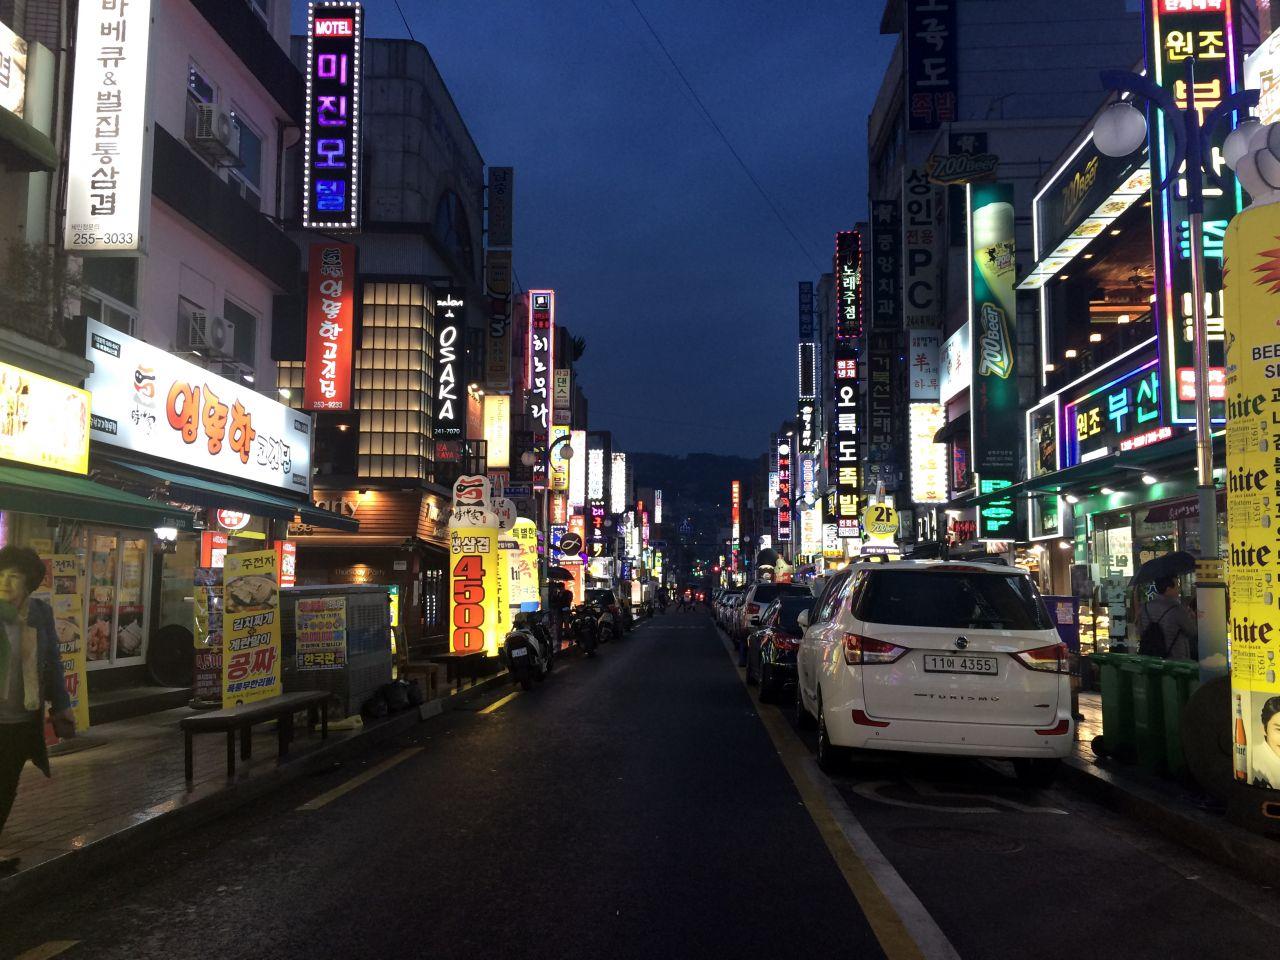 Car parked in front of buildings with vibrant lights, part of the bustling 부평족발골목 area in Korea.